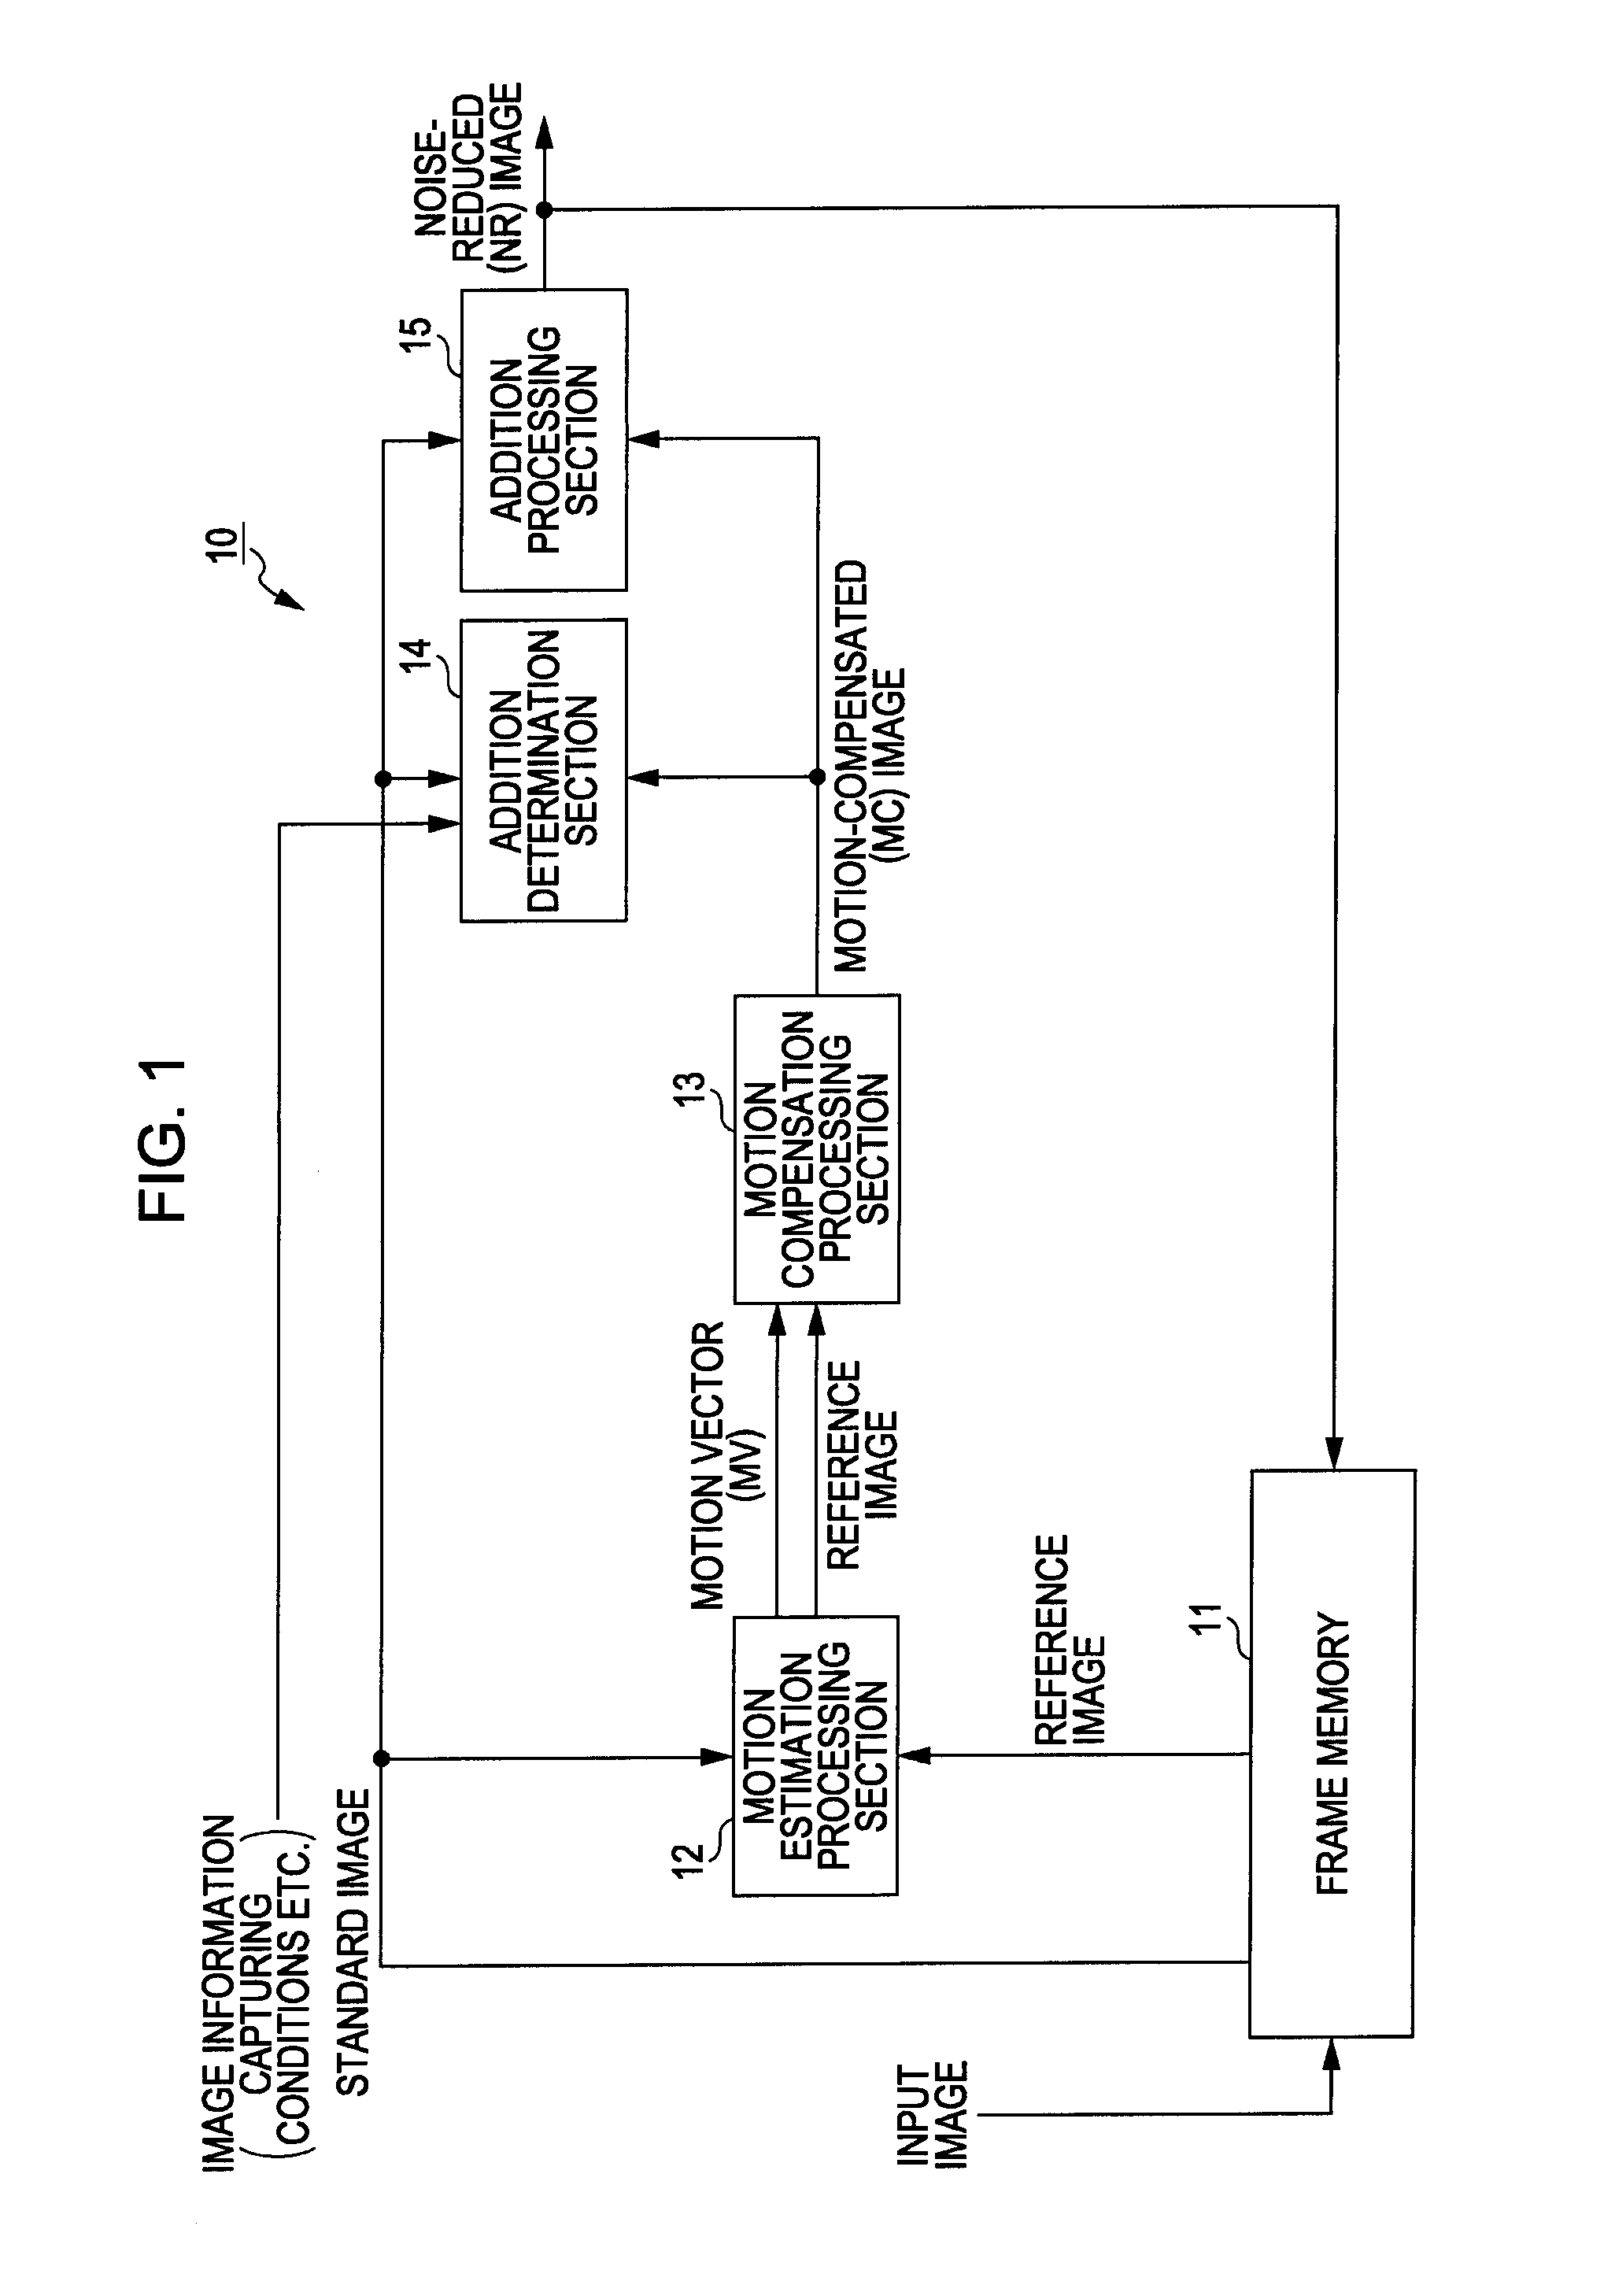 Motion-compensation image processing apparatus, image processing method, and program